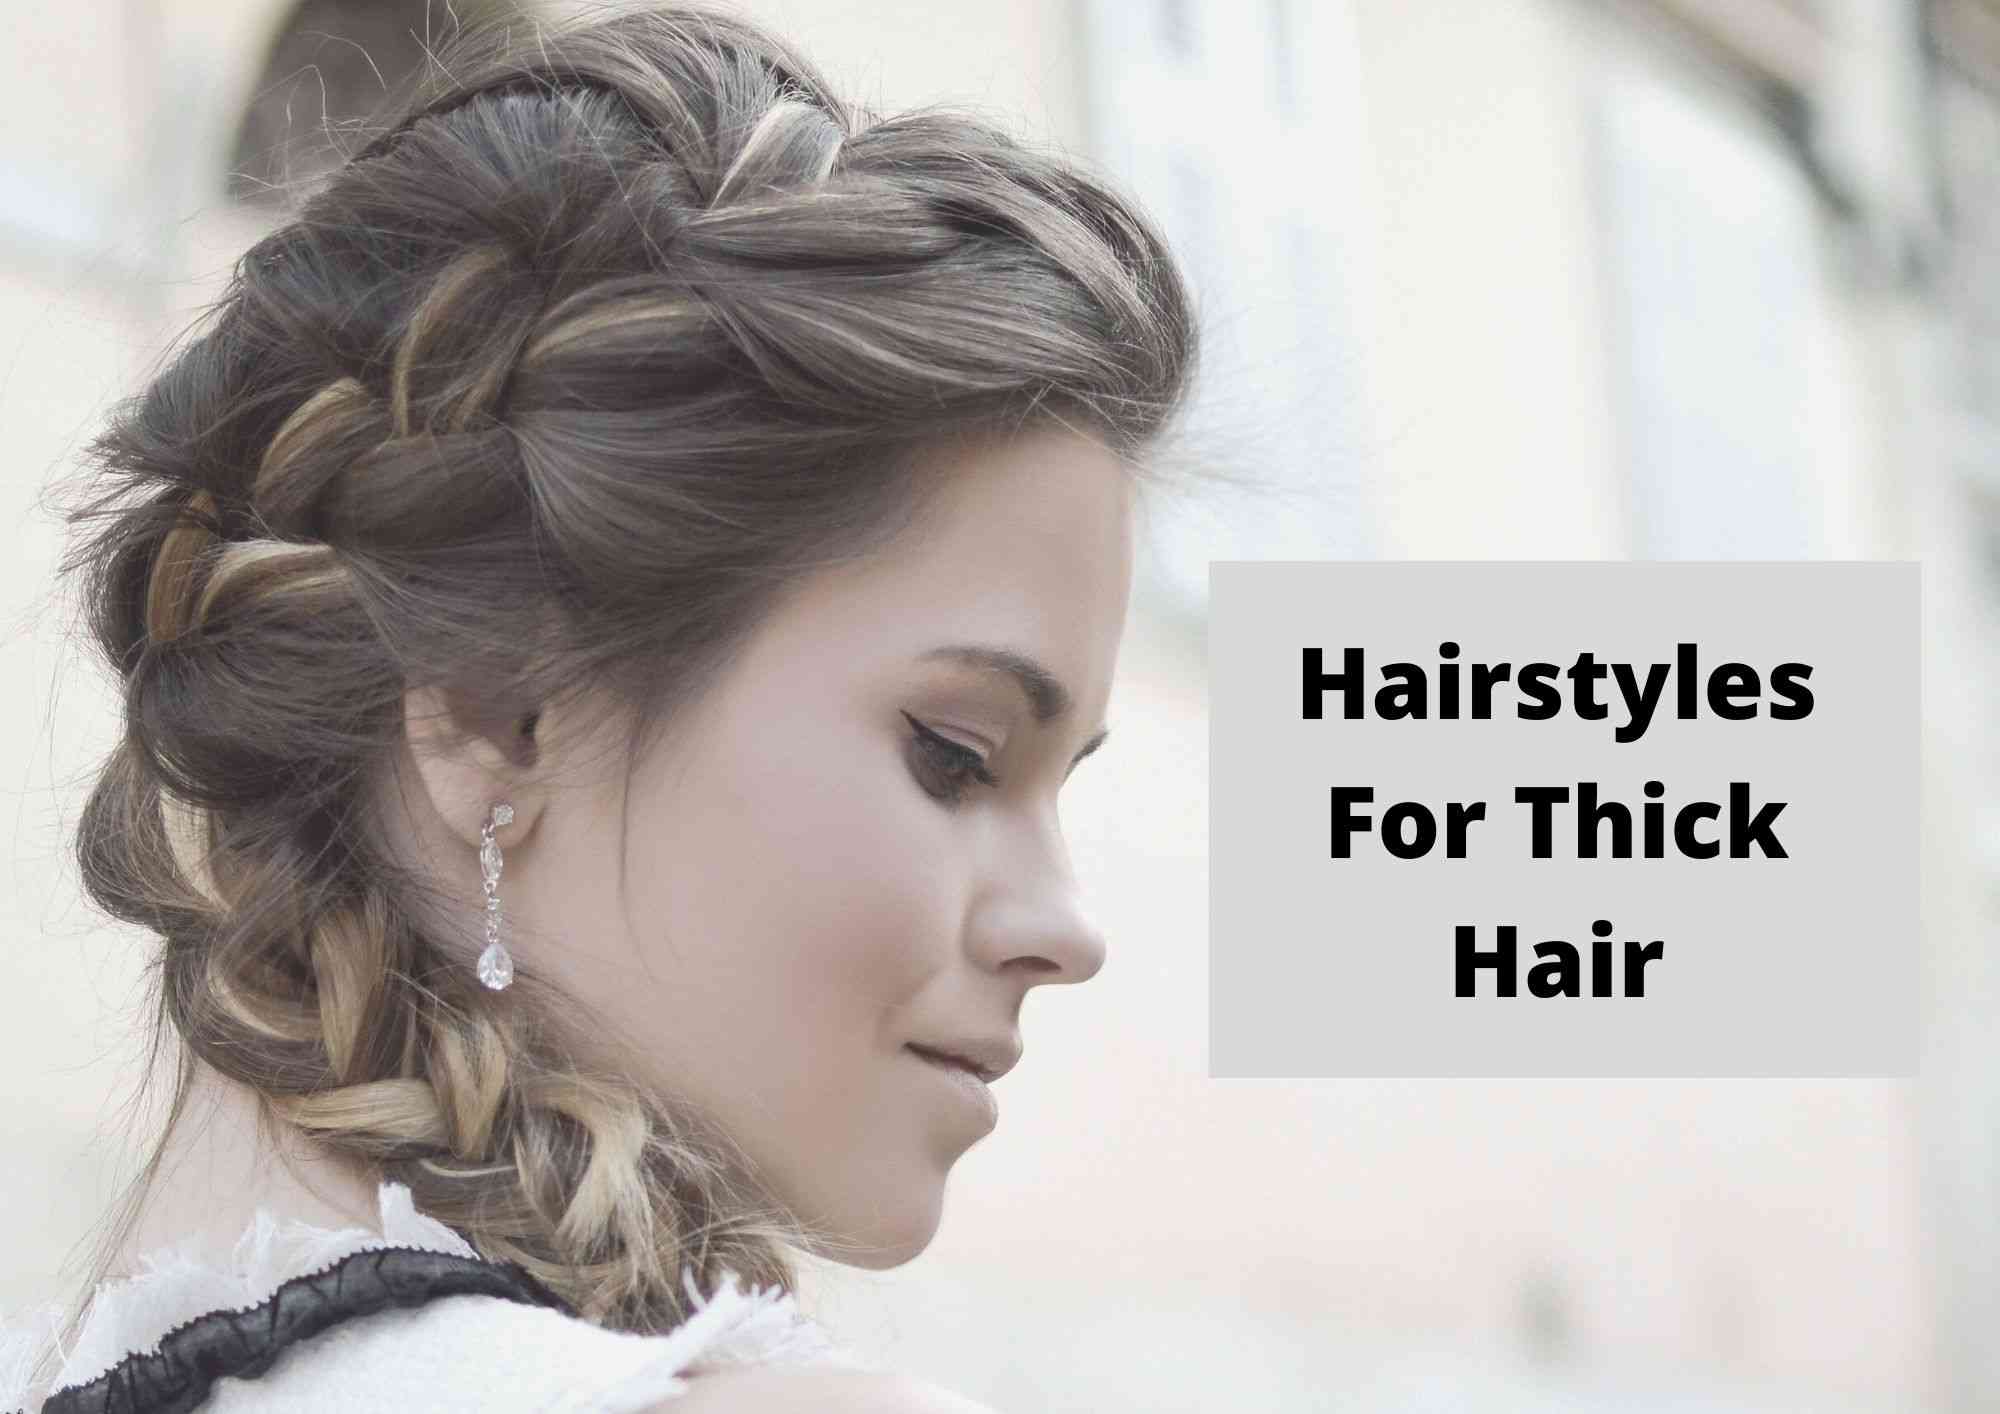 Details more than 150 everyday hairstyles for frizzy hair